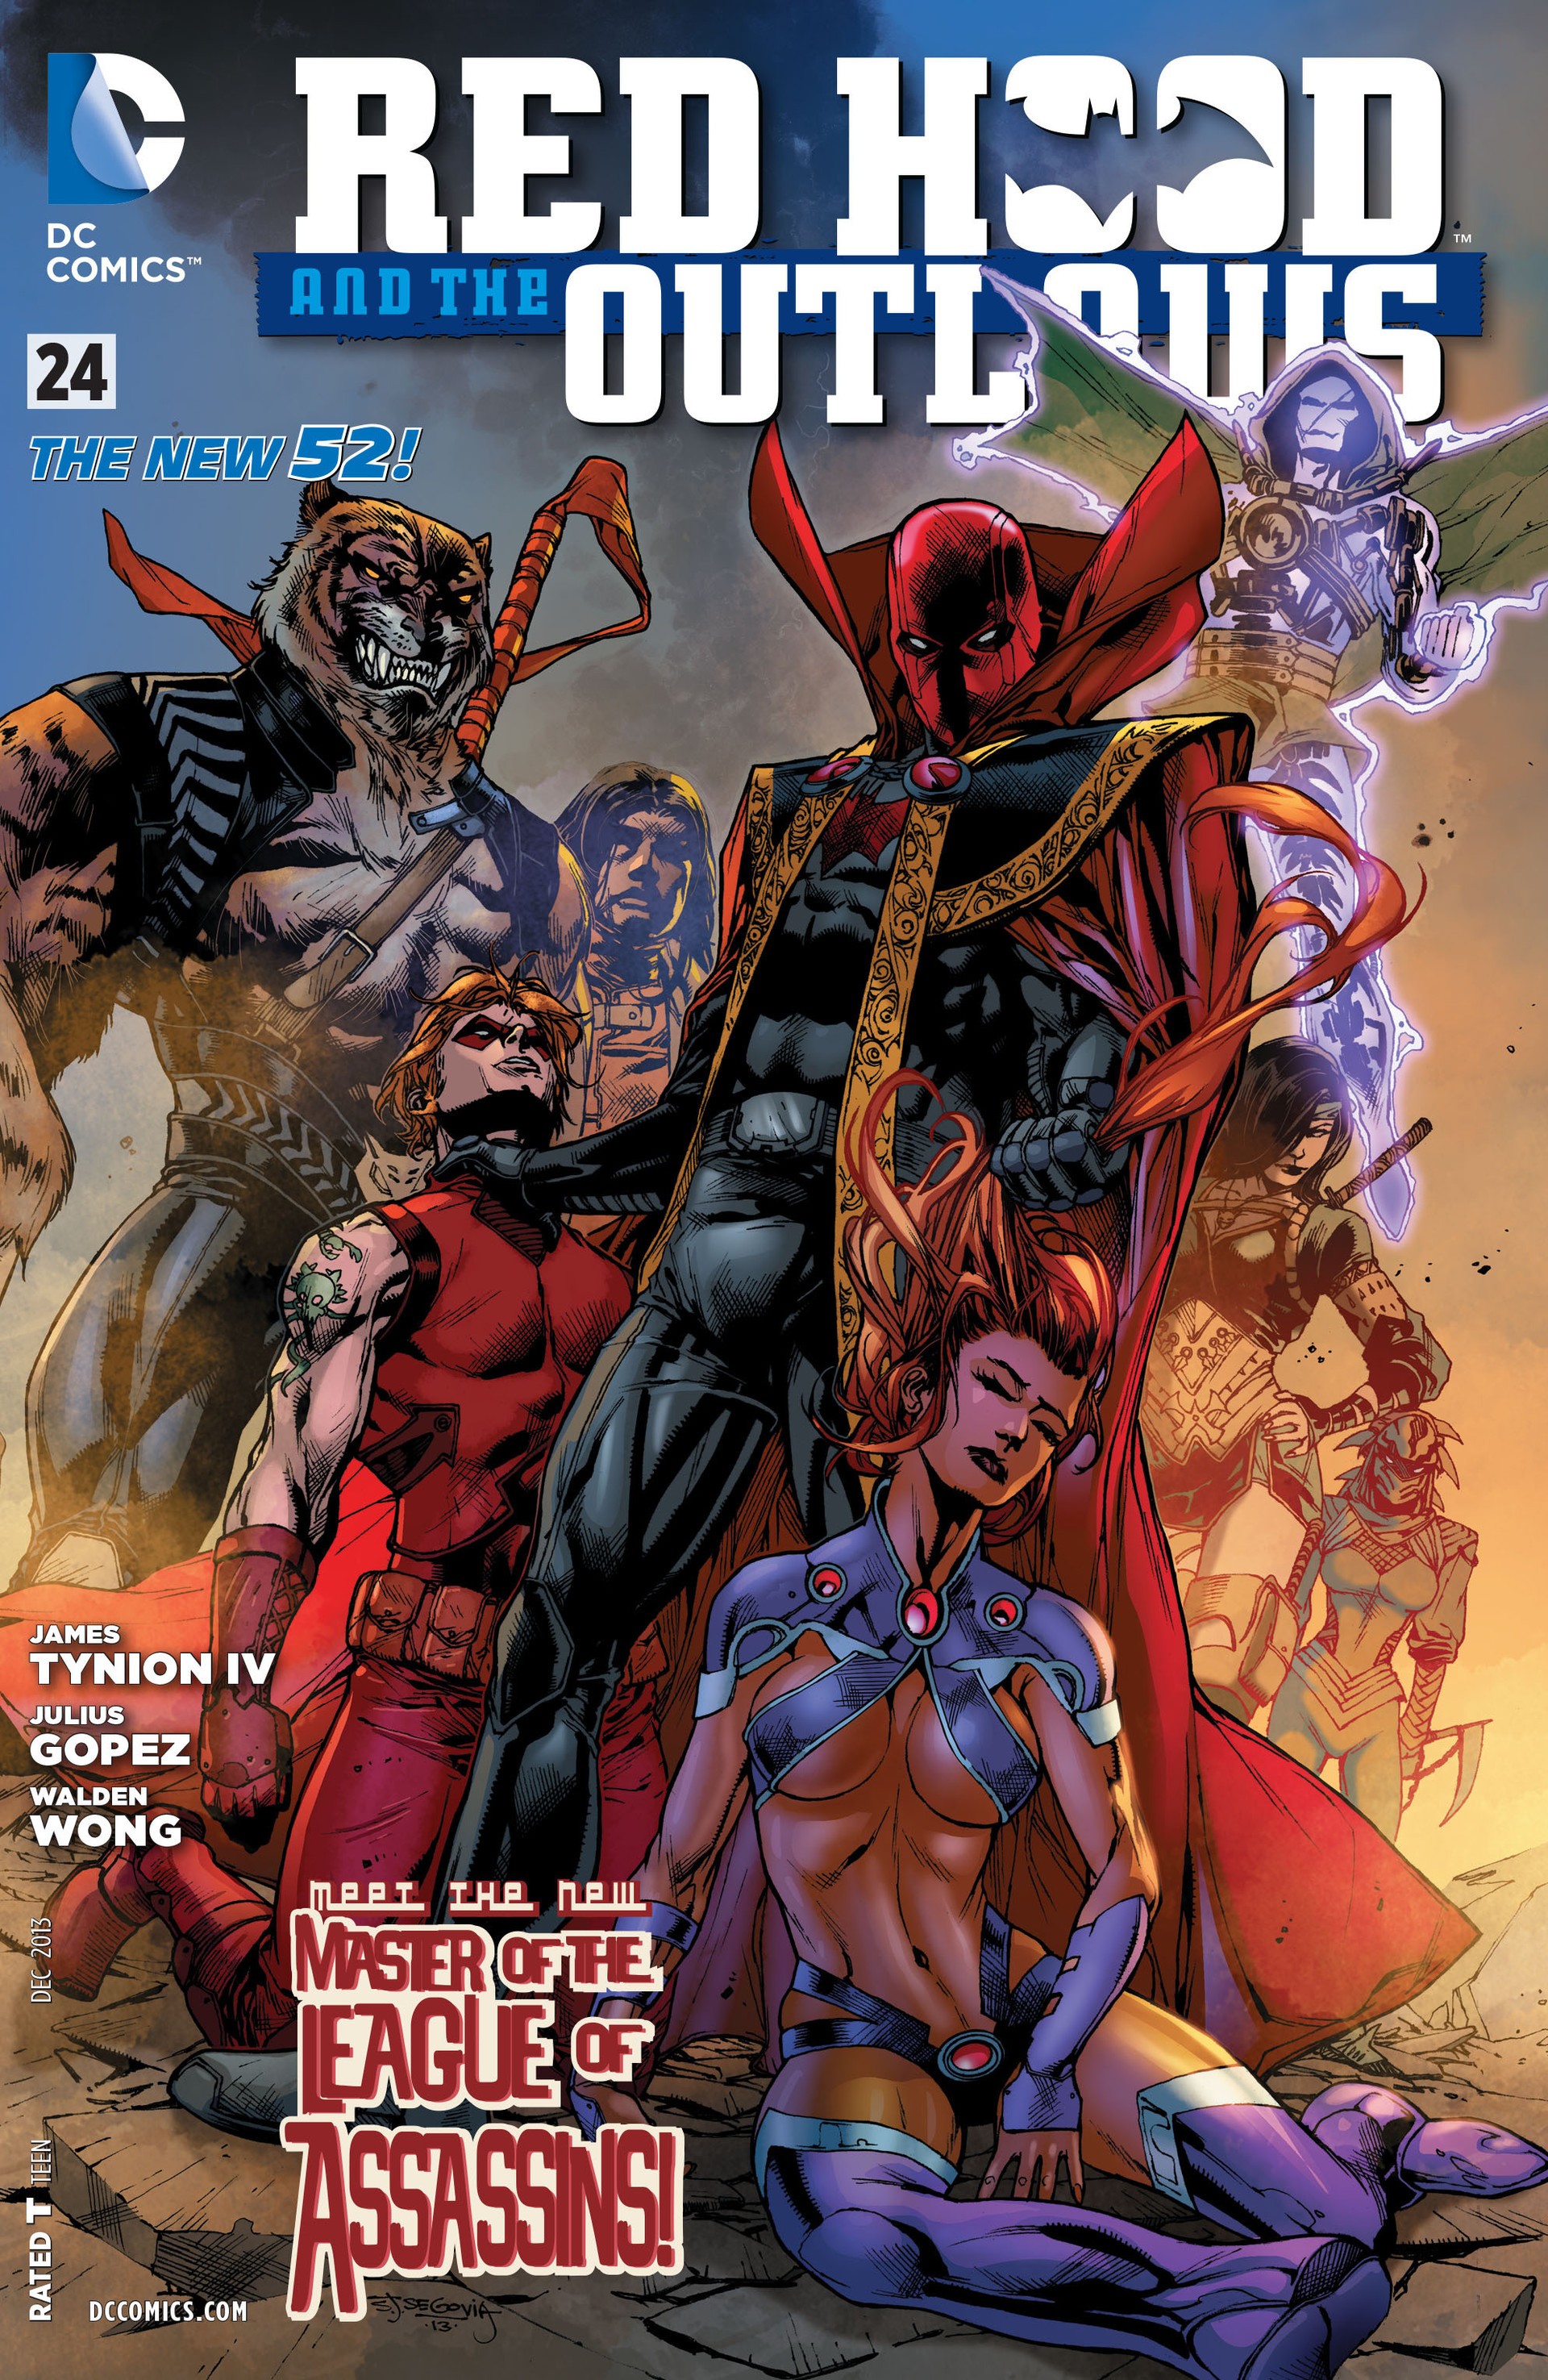 Red Hood and the Outlaws Vol. 1 #24